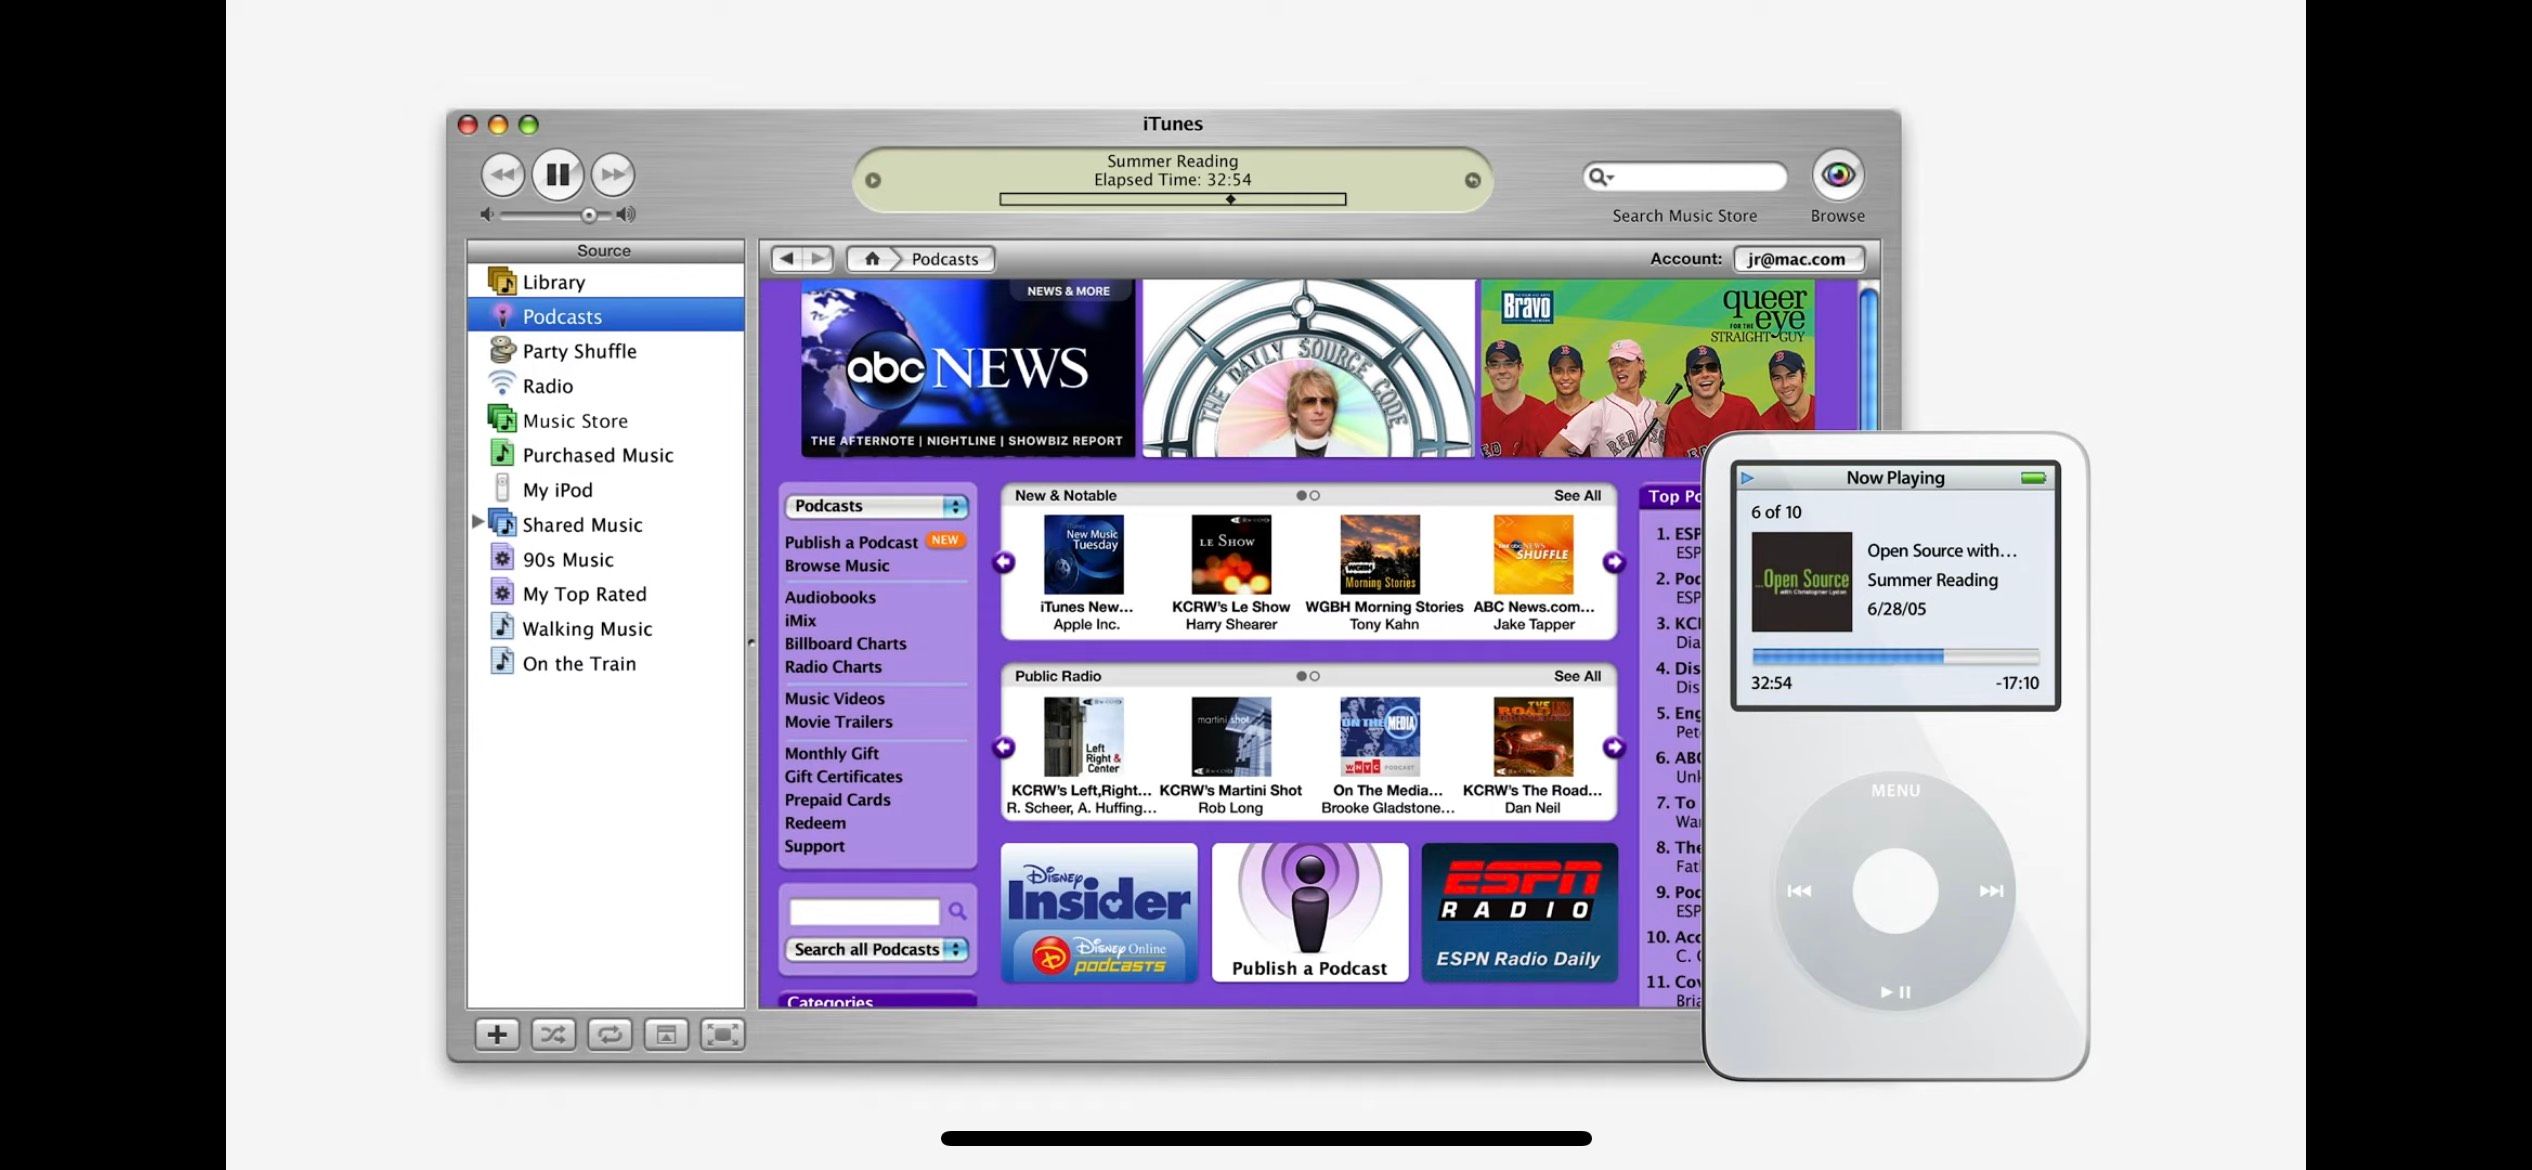 Apple first added support for podcasts to iTunes 4.9 back in June 2005.